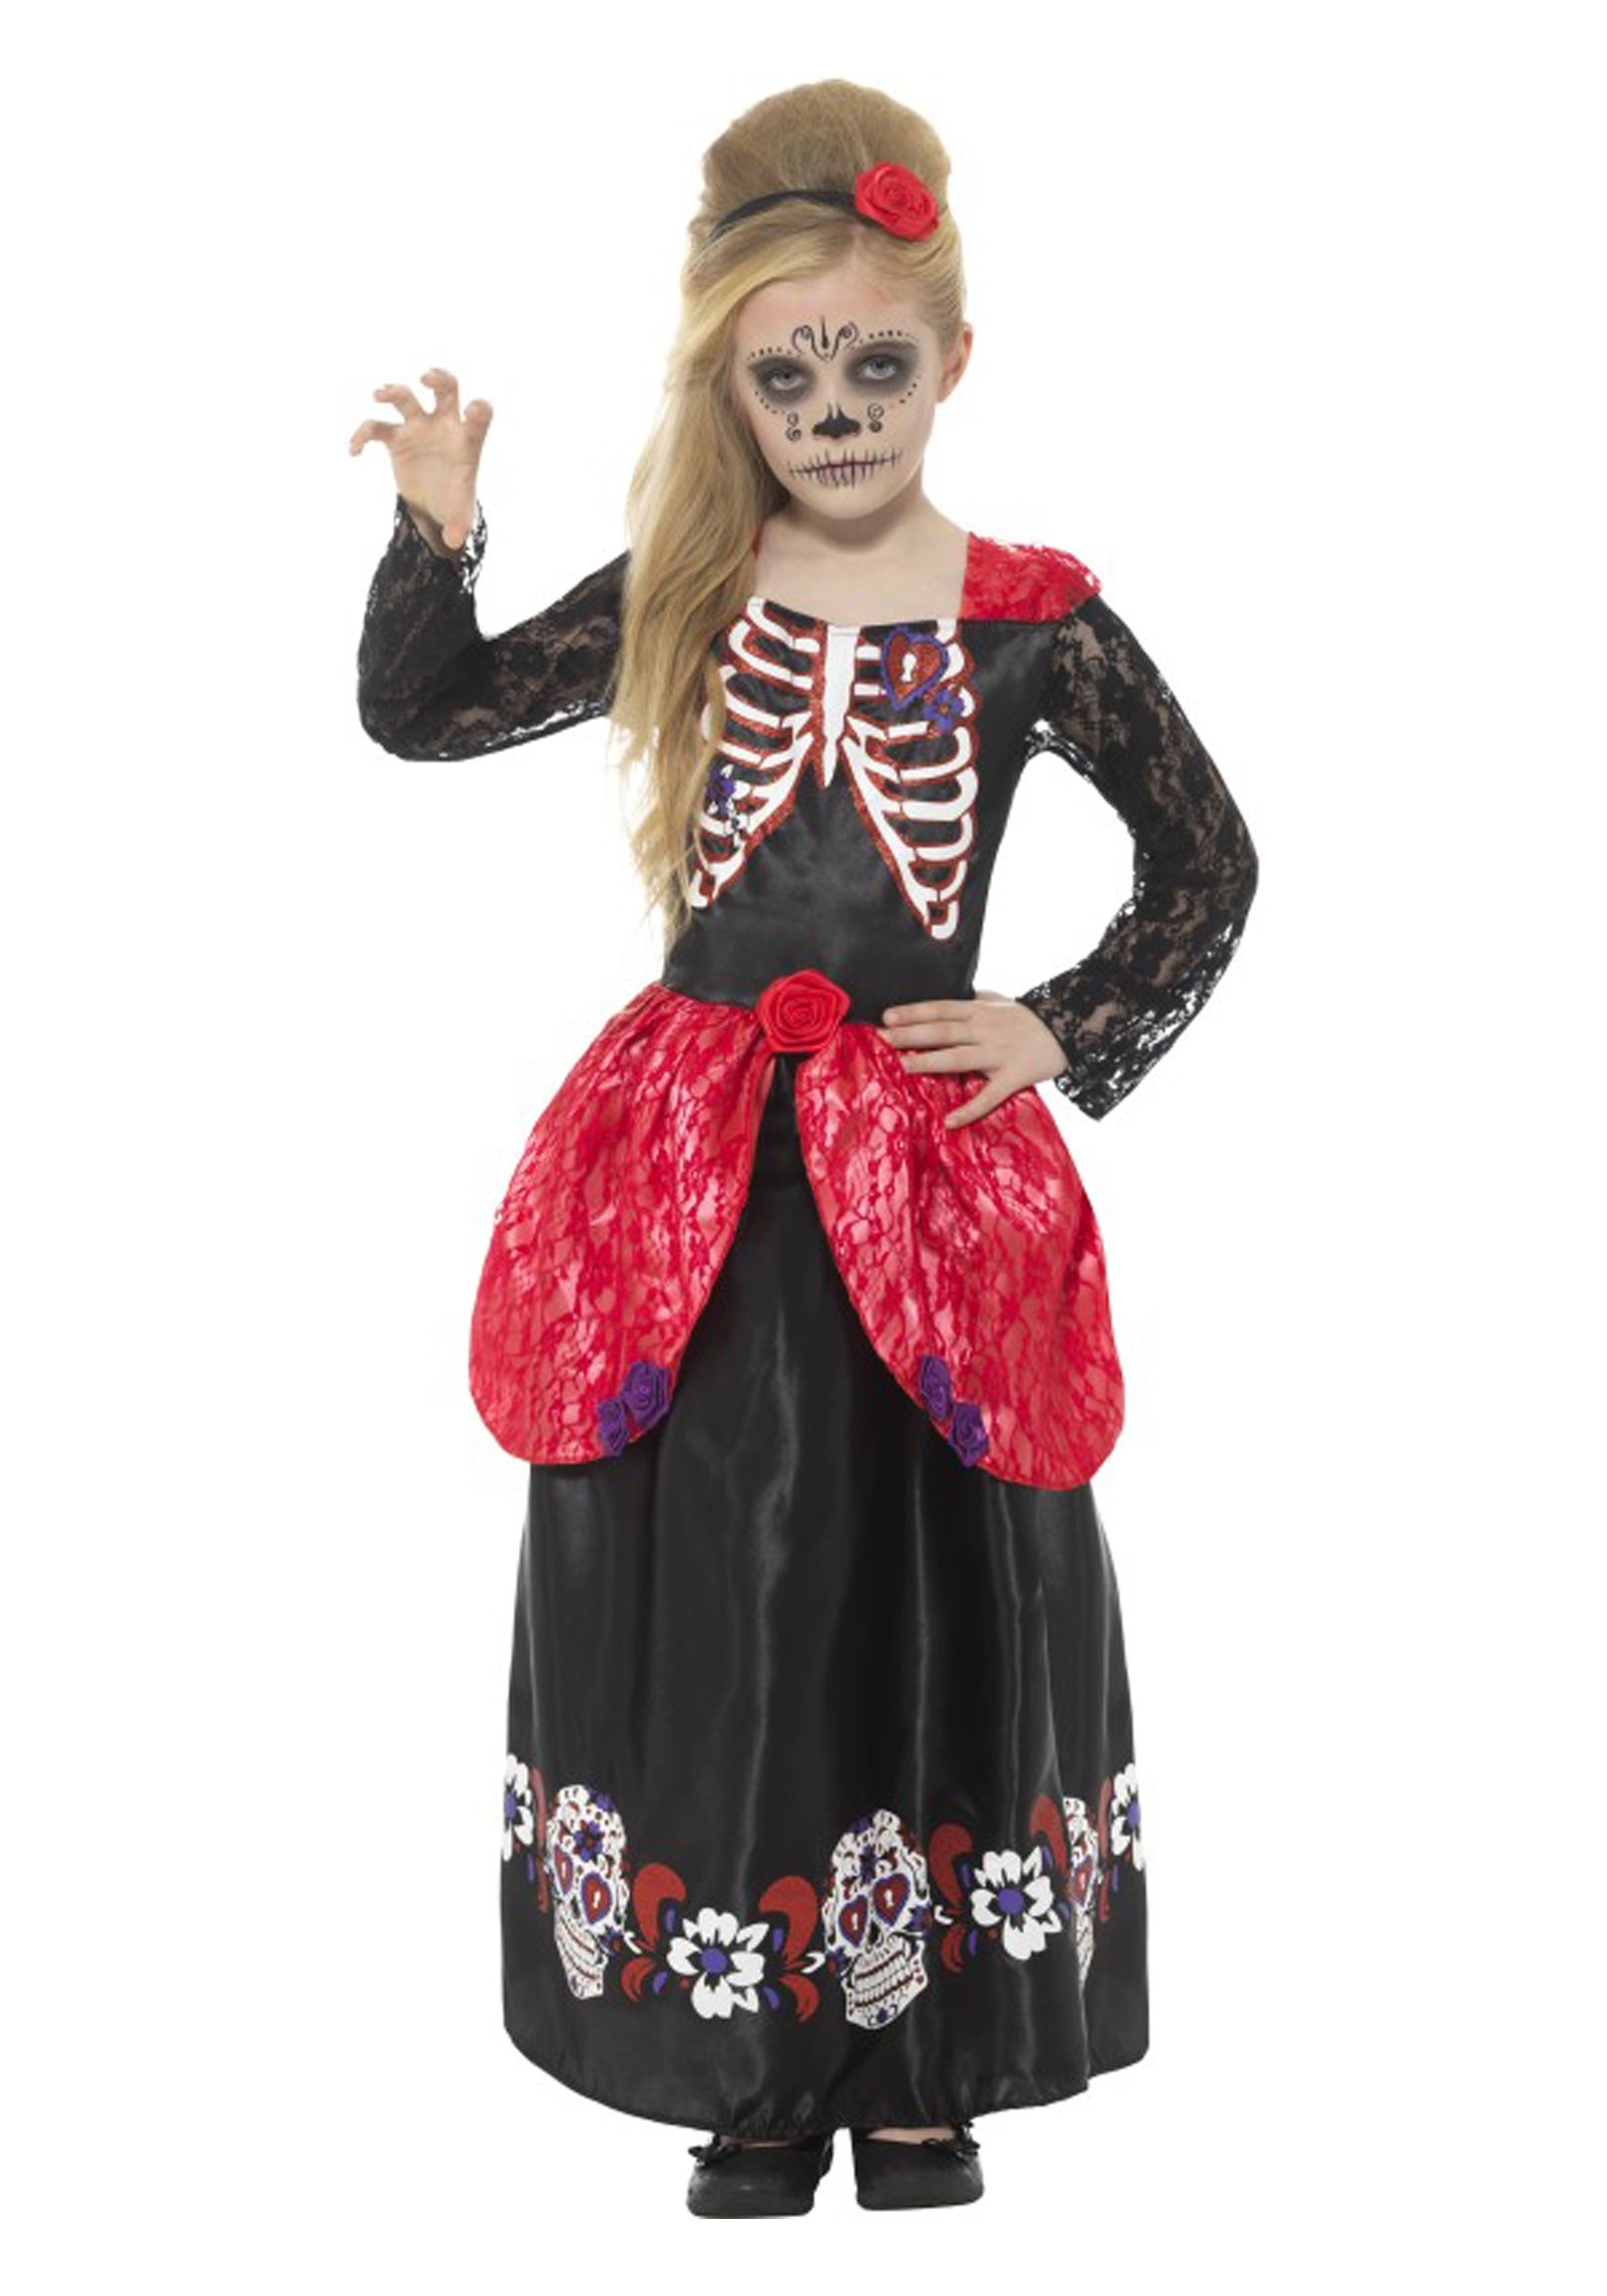 Photos - Fancy Dress Smiffys Day of the Dead Girl's Costume Black/Red SM45188